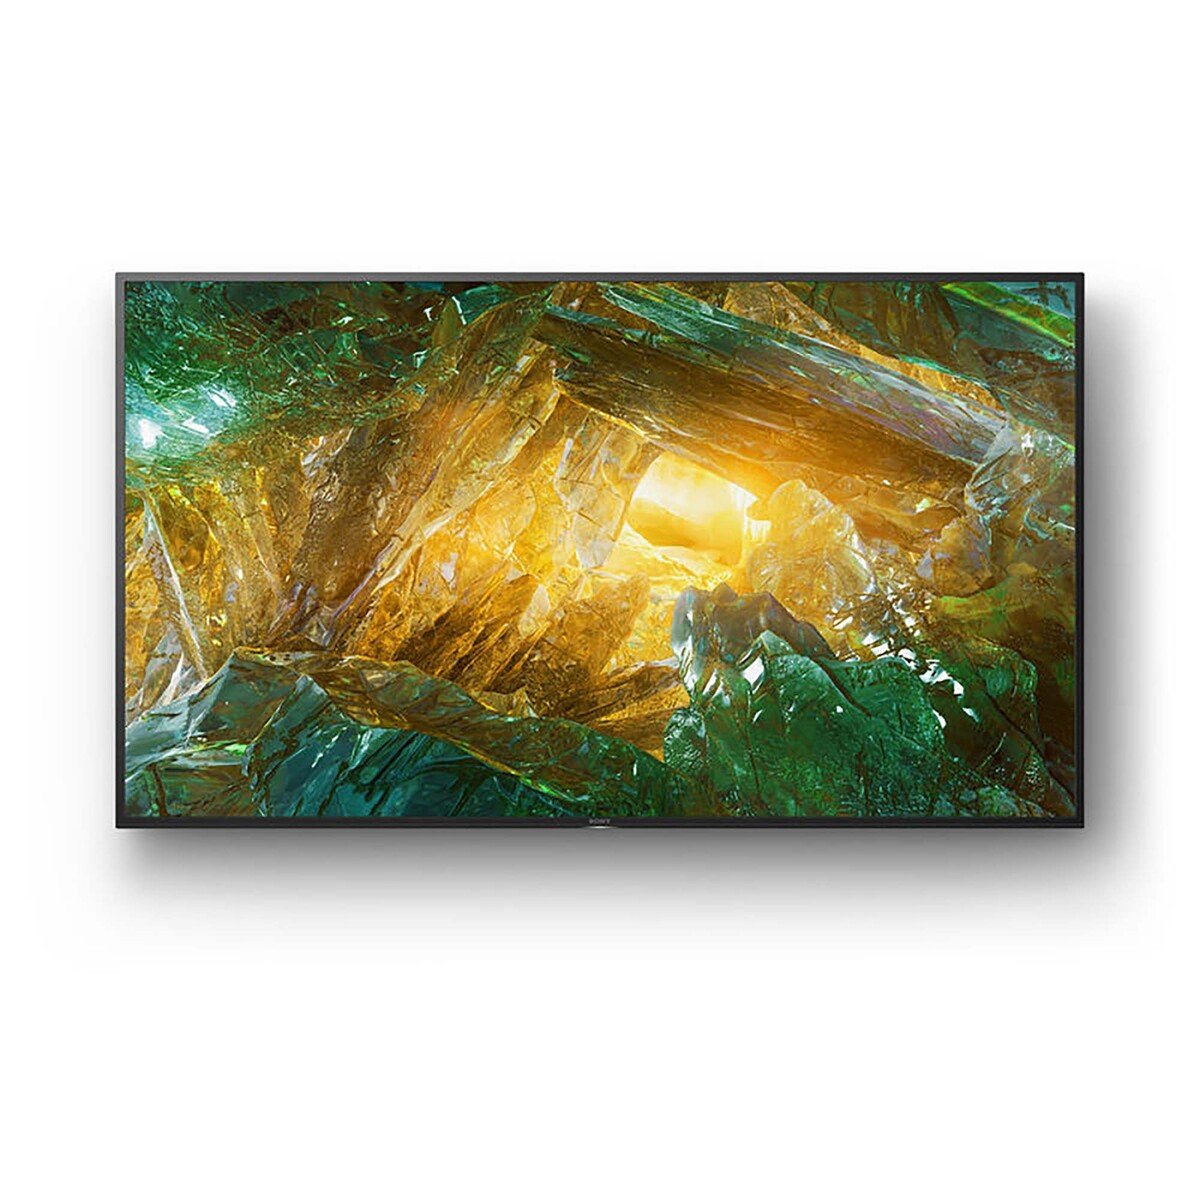 Sony 4K Android Smart LED TV KD85X8000H 85in